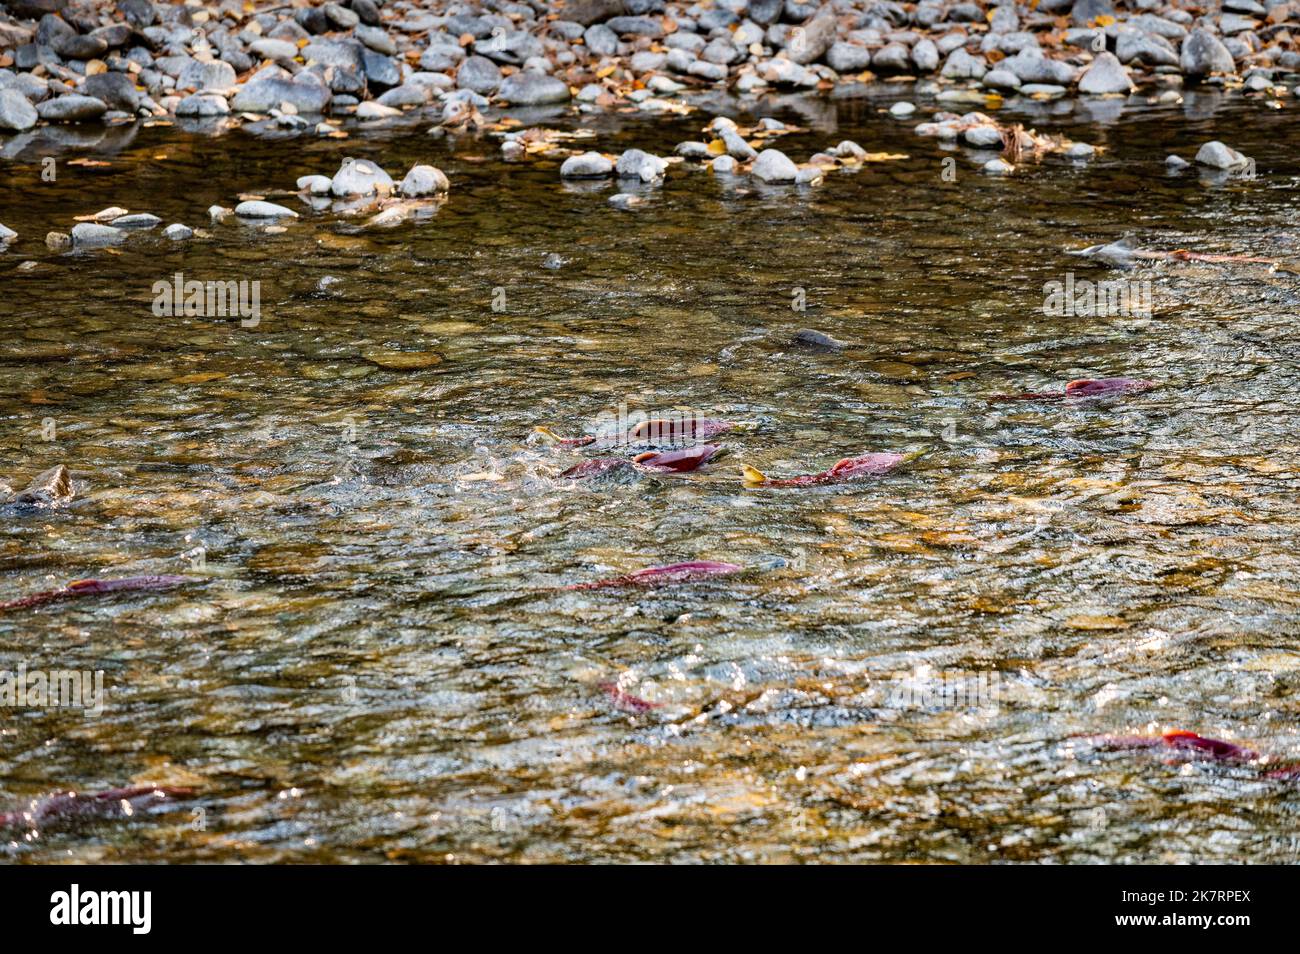 Group of sockeye salmon in the Adams River as part of the massive quadrennial 'dominant' salmon run migration. The event draws large crowds. Stock Photo